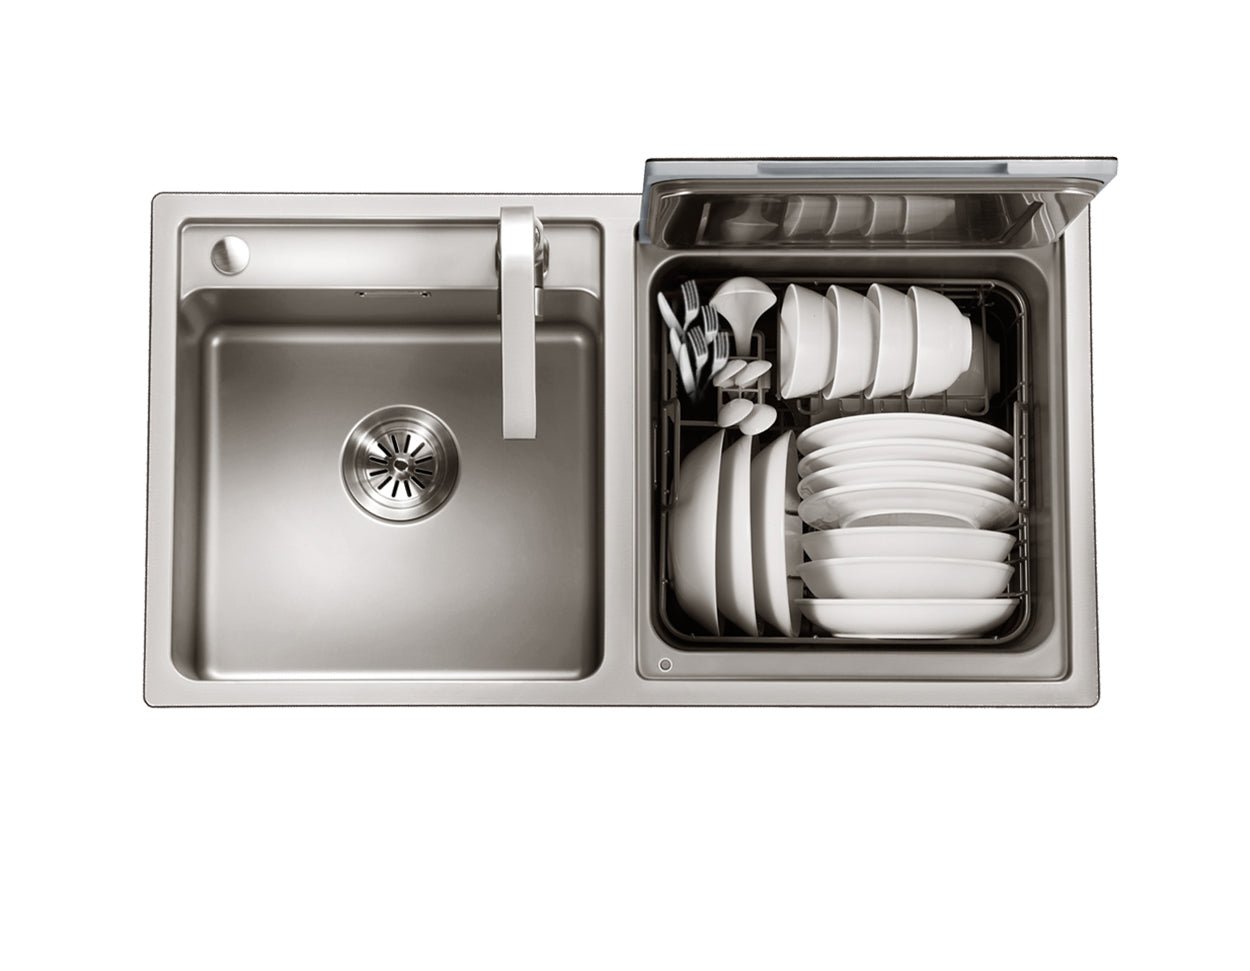 2-IN-1 In-Sink Dishwasher - Right / Stainless Steel / 36